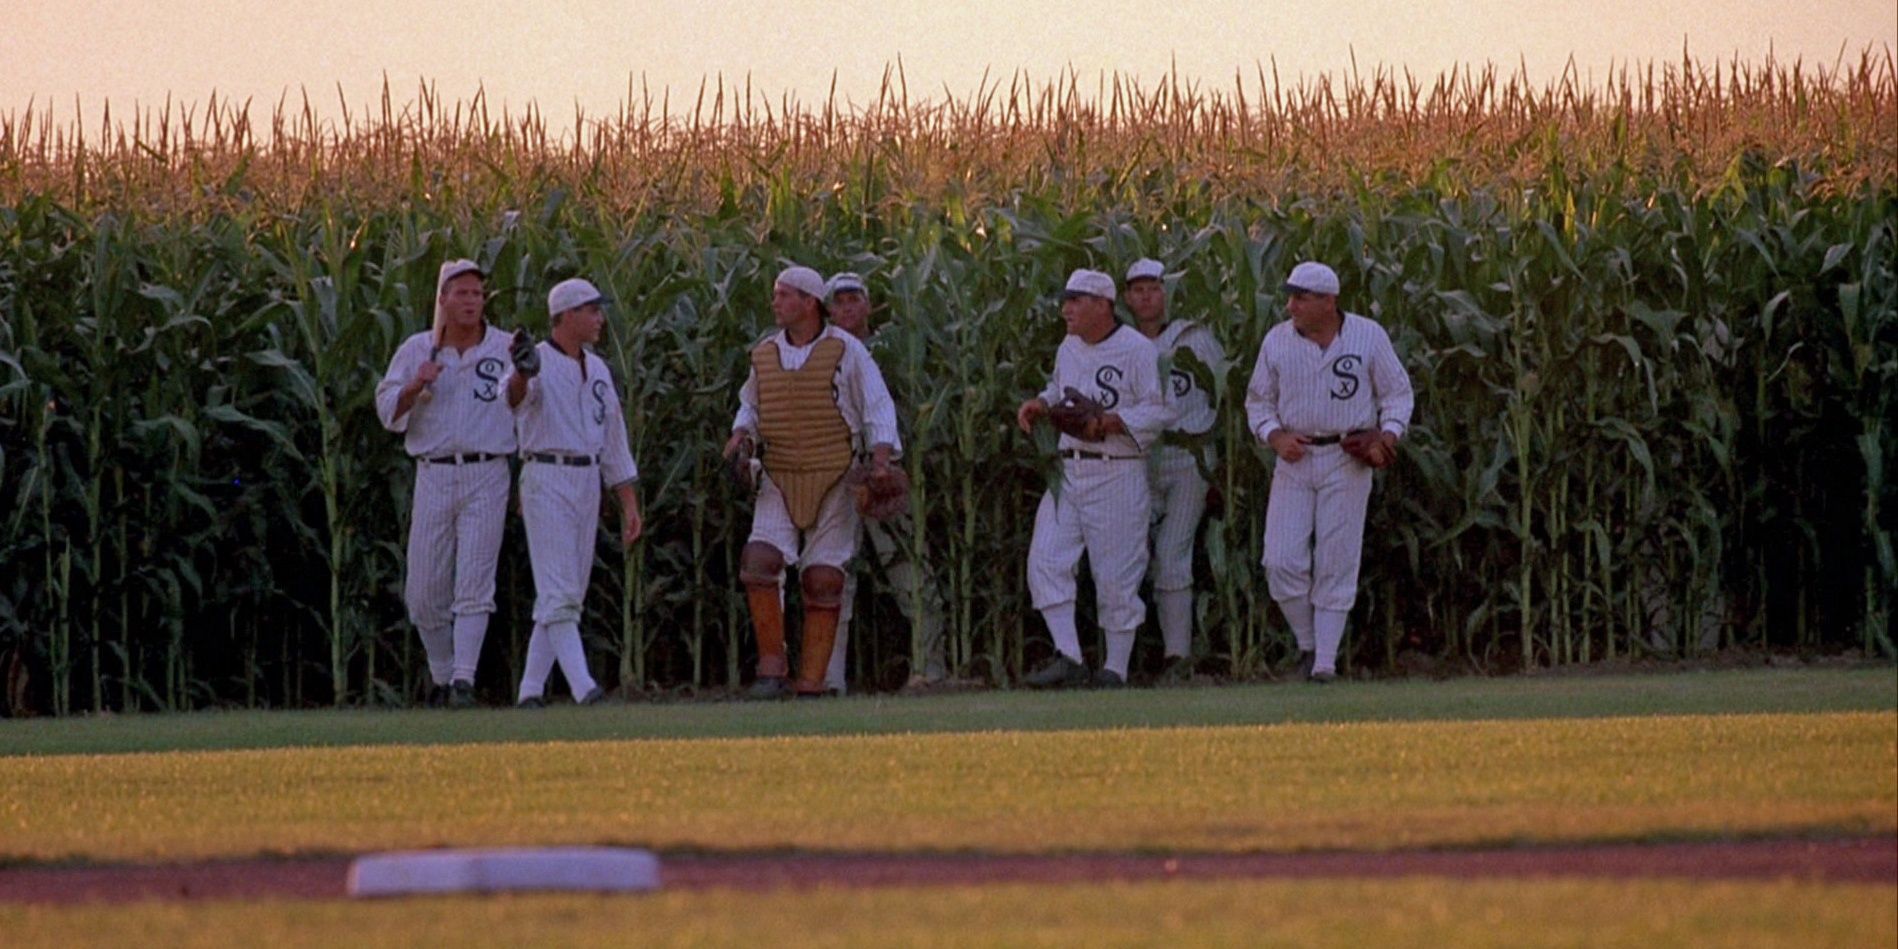 The White Sox walk out of the corn field in Field of Dreams